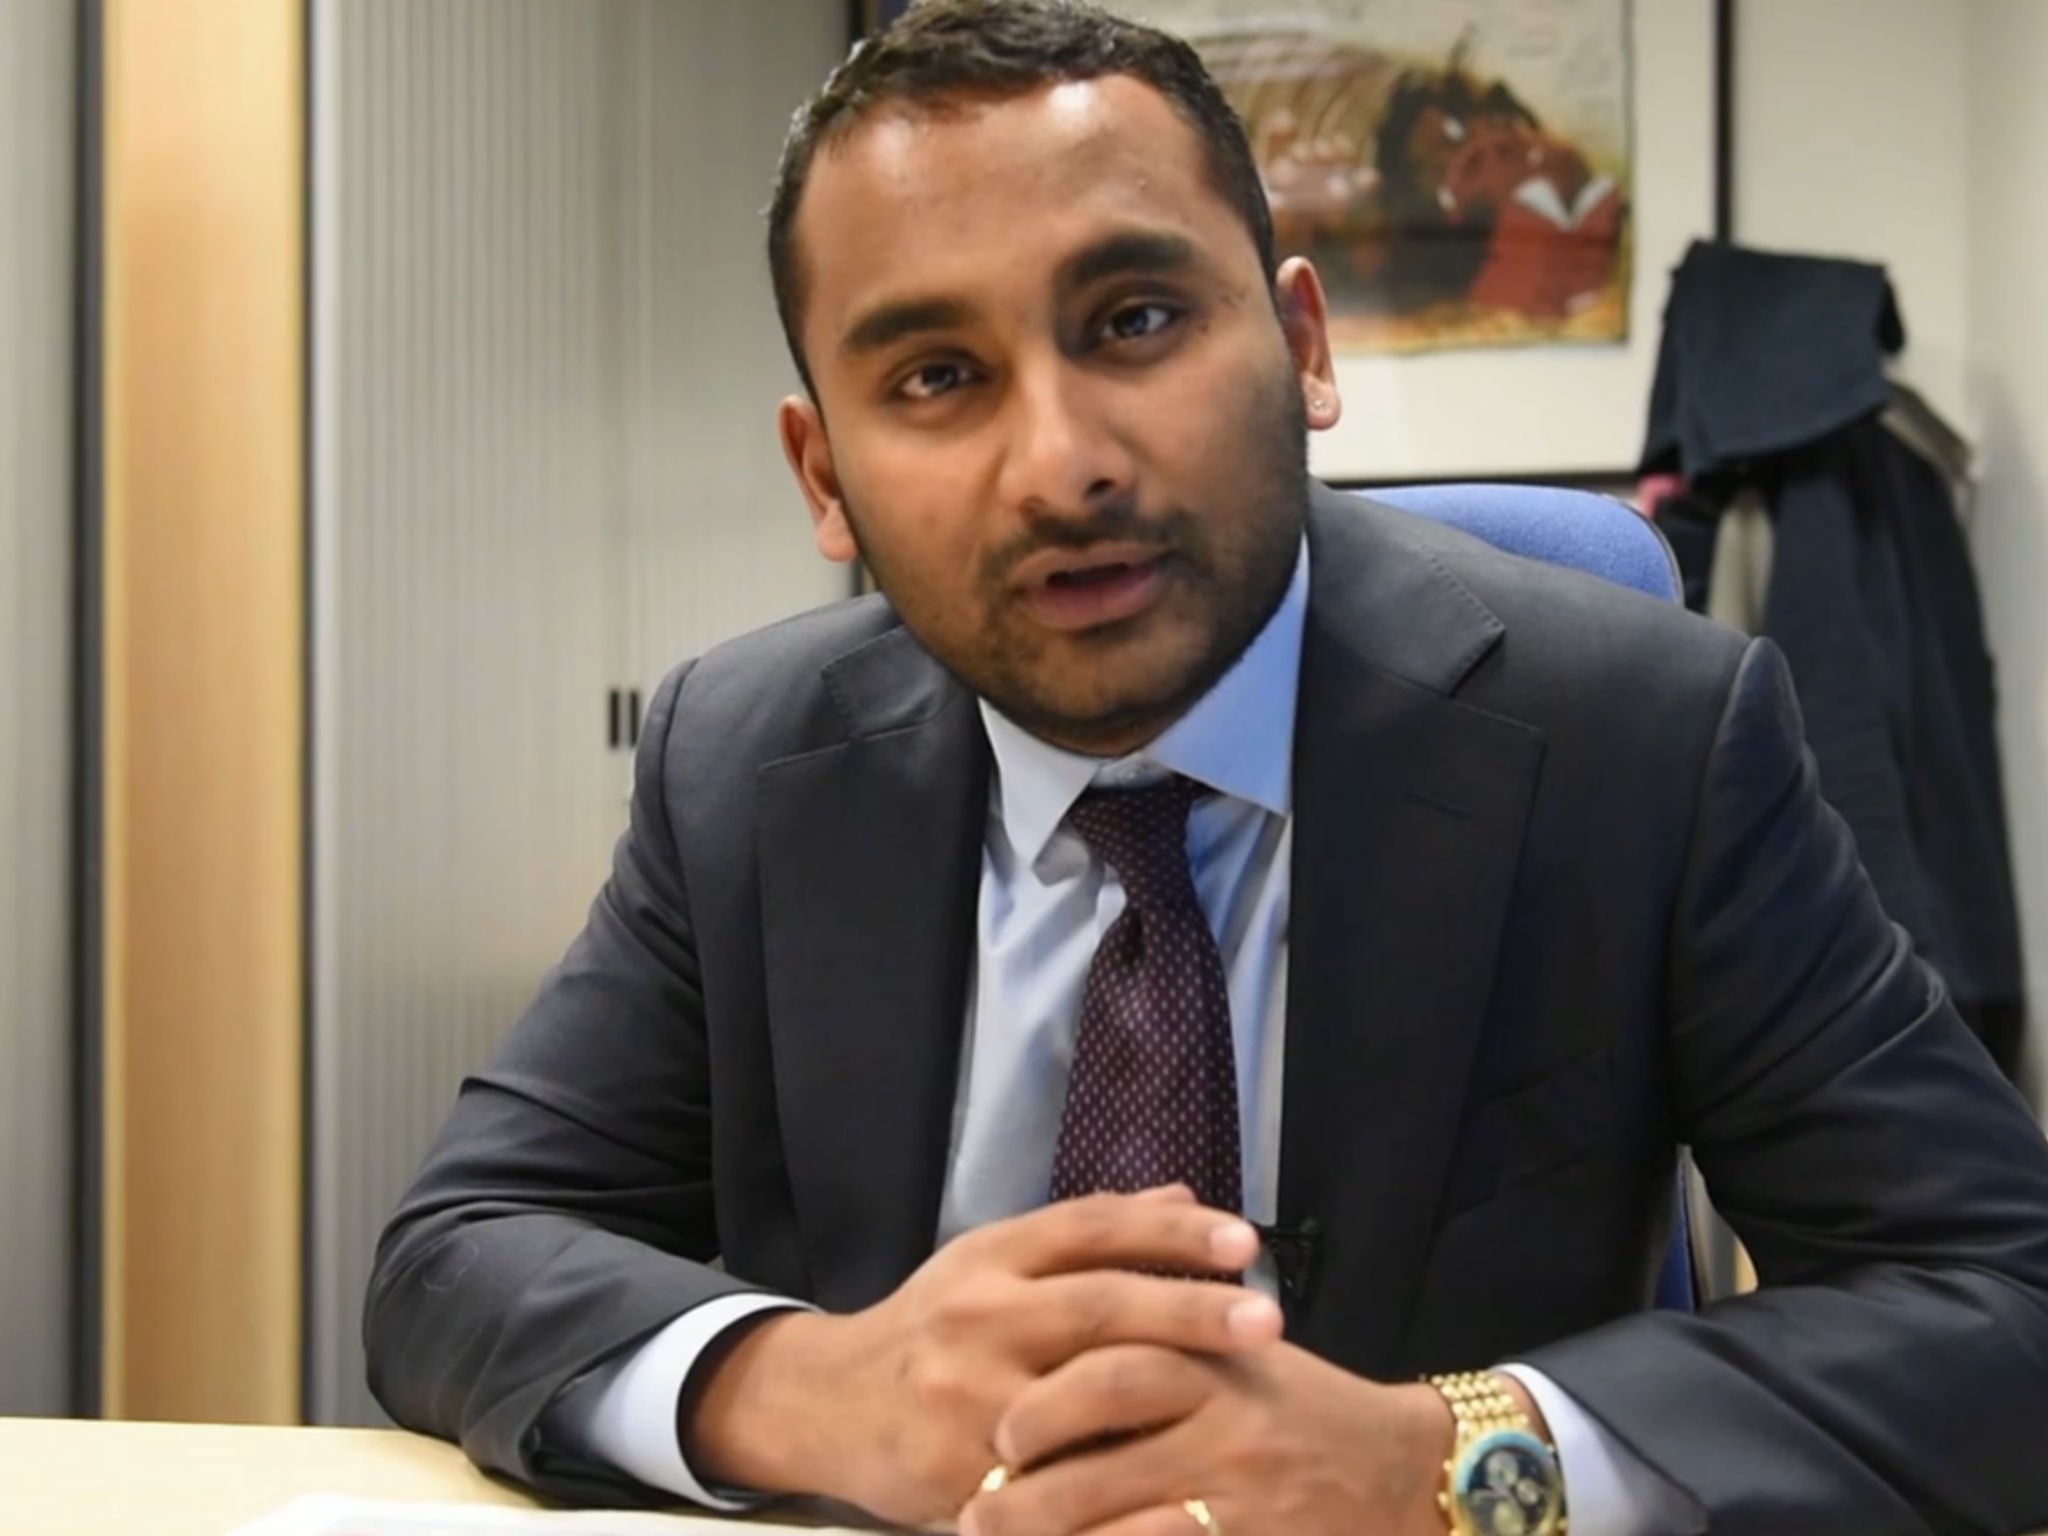 Amol Rajan, editor of The Independent, has pledged to give up meat for January